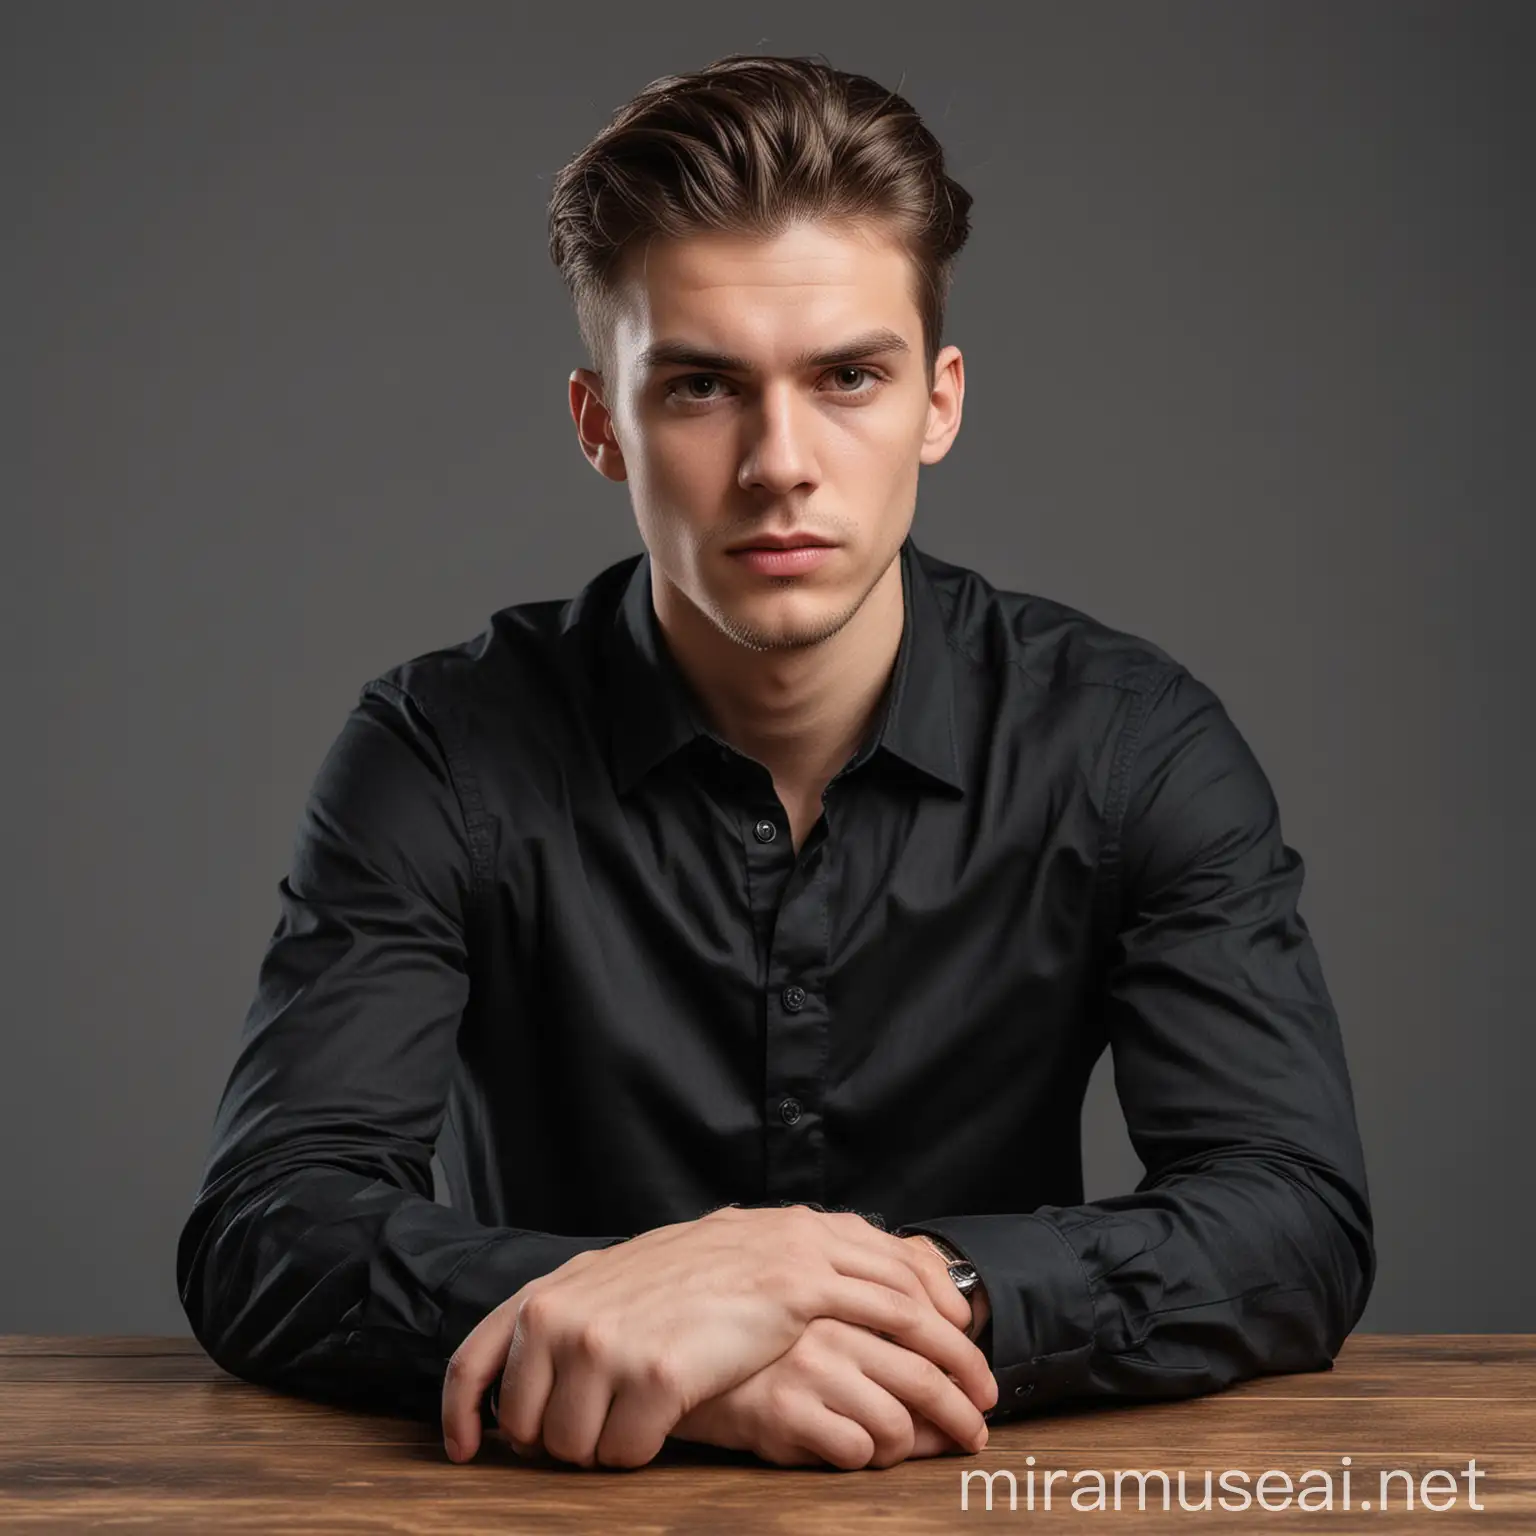 Serious young man sitting on a table and looking in camera in black pent and shirt